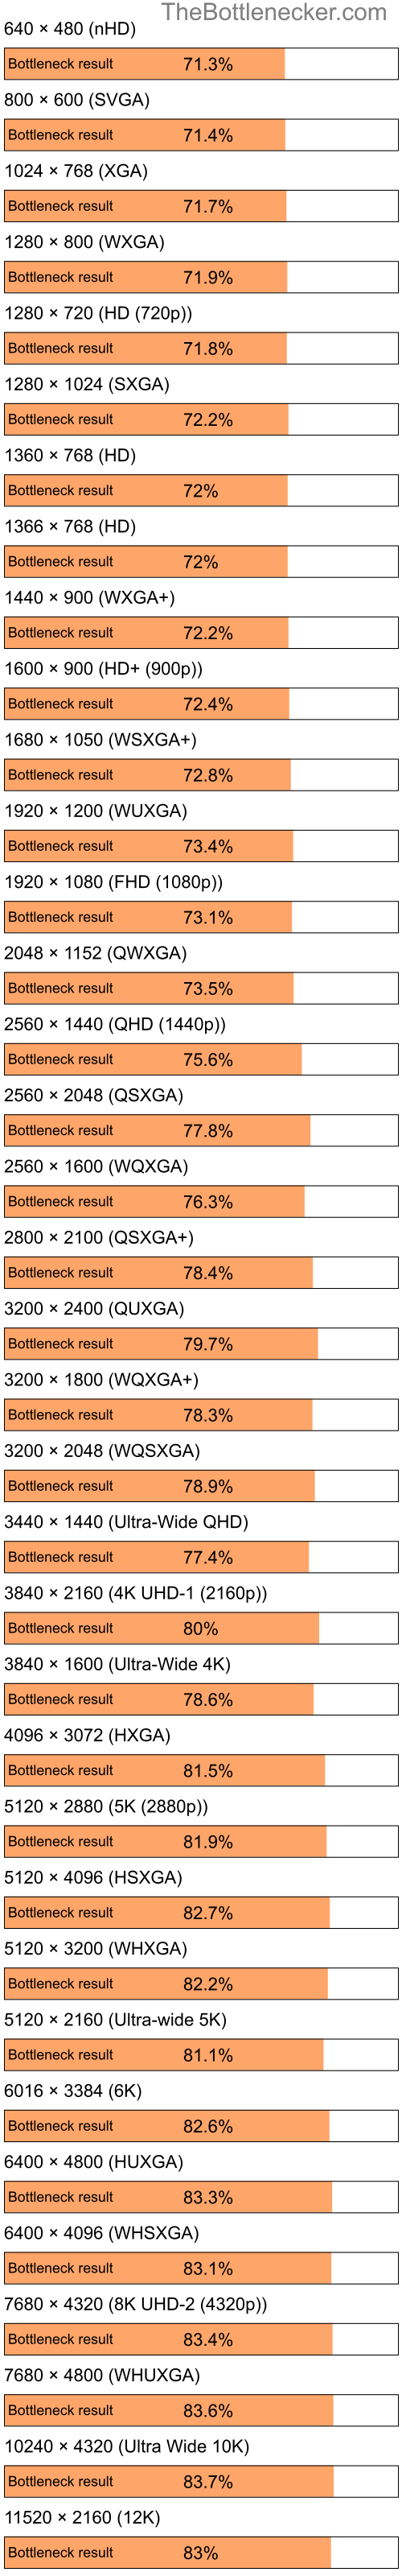 Bottleneck results by resolution for Intel Pentium 4 and AMD Mobility Radeon HD 3450 in Graphic Card Intense Tasks